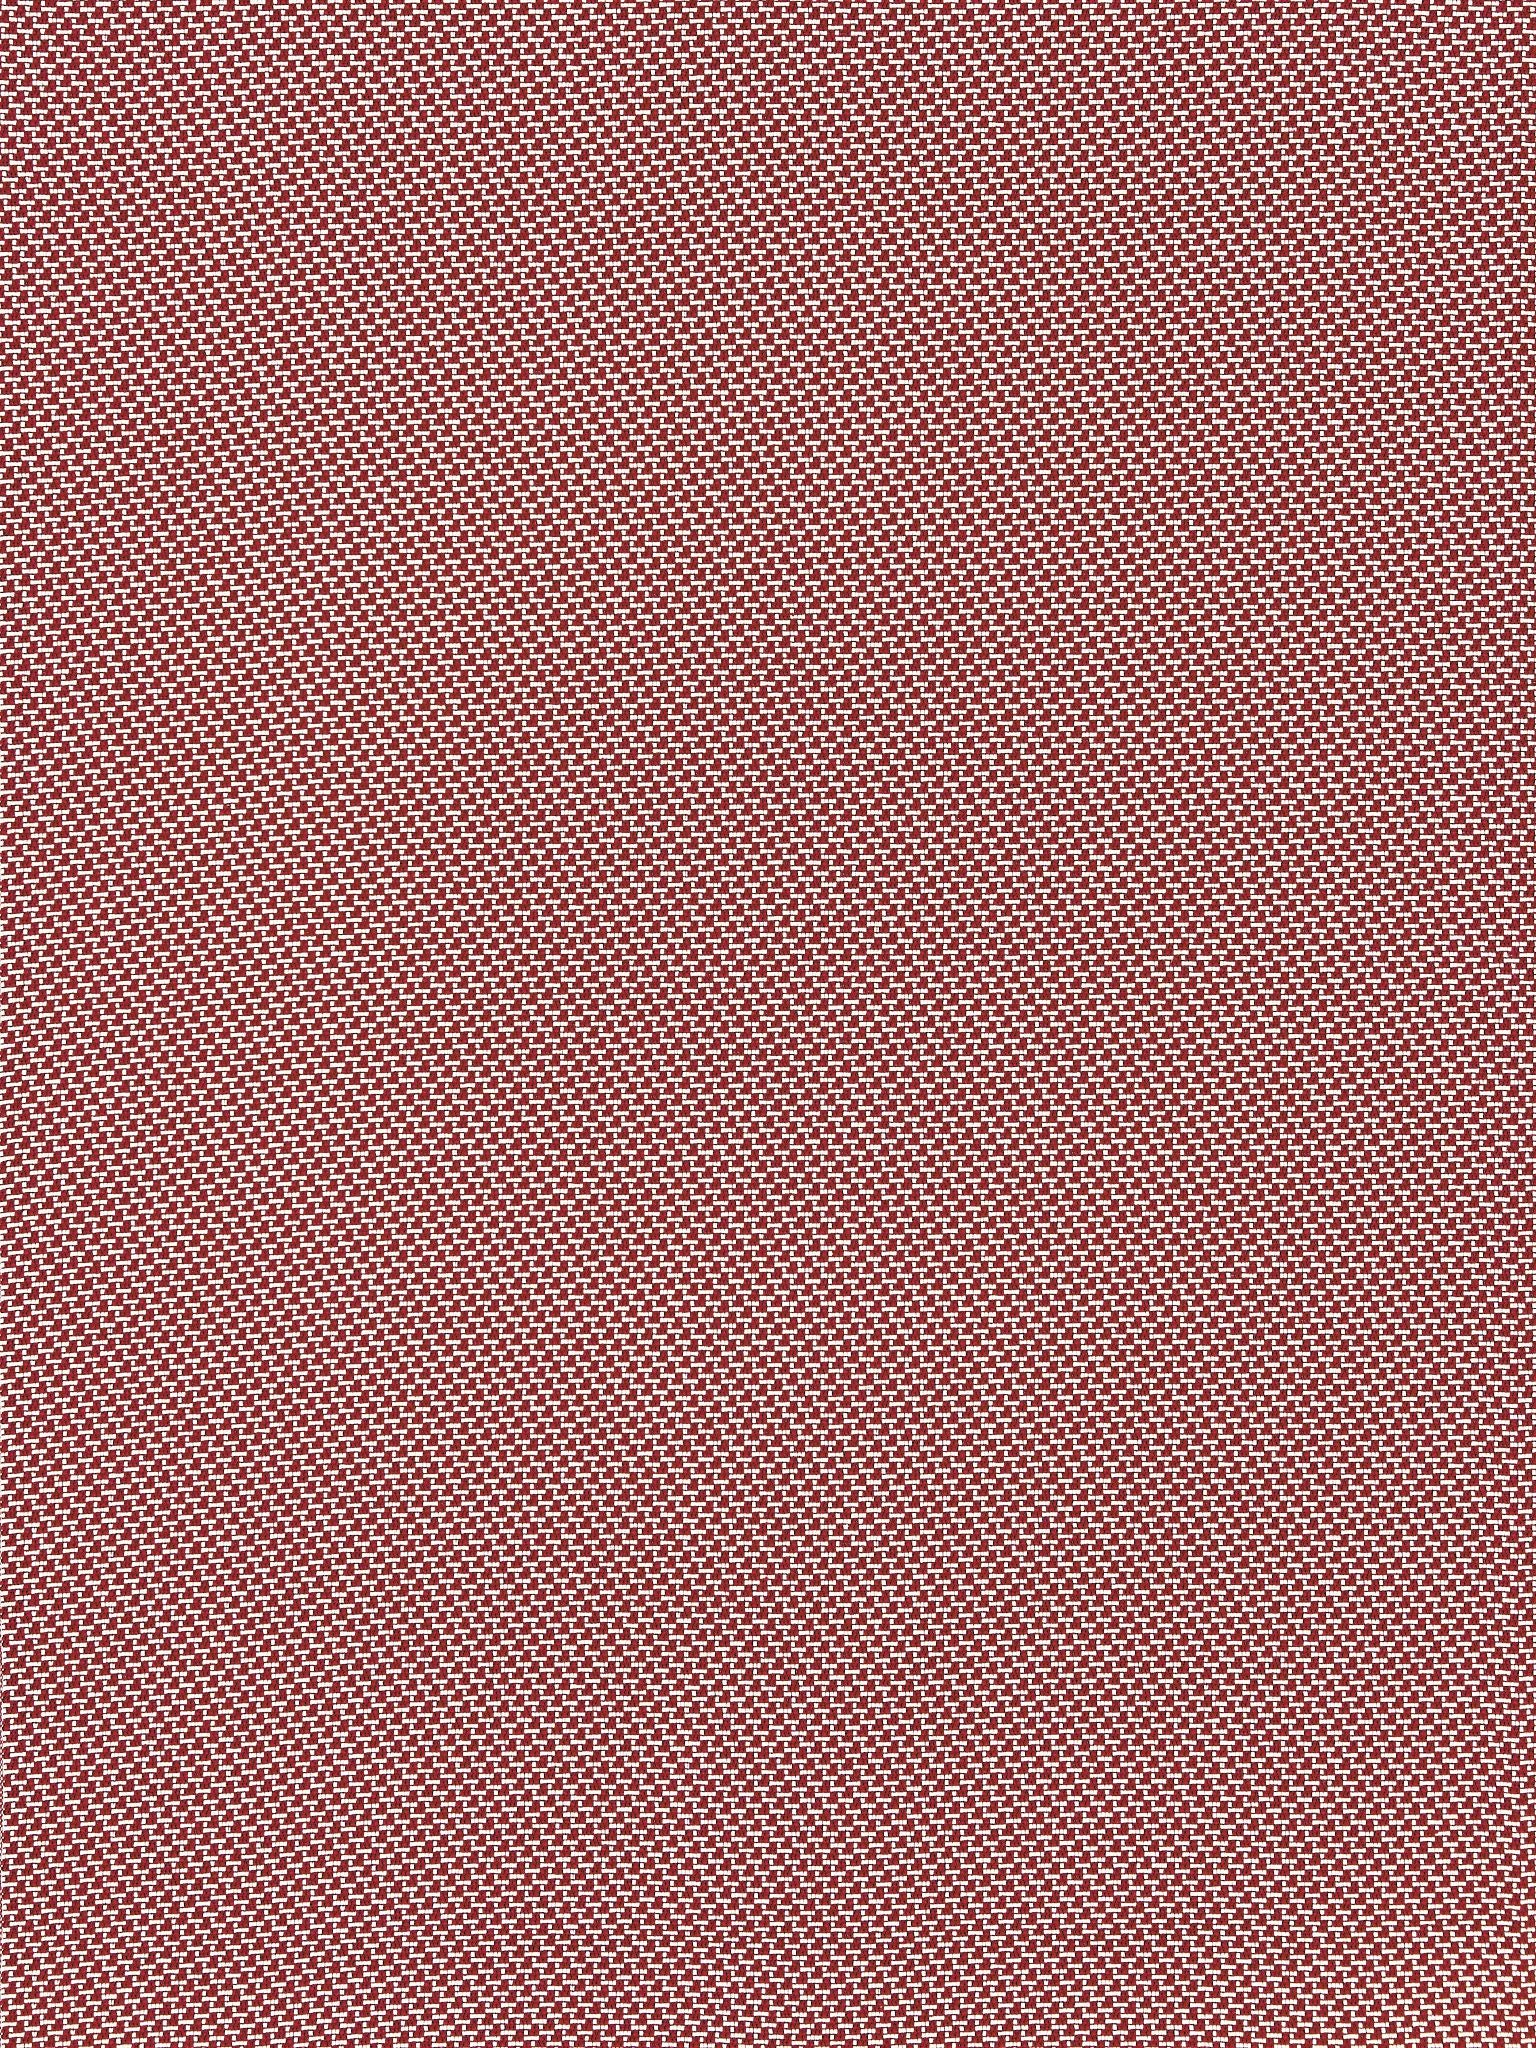 North Downs fabric in ruby color - pattern number EY 000813ND - by Scalamandre in the Old World Weavers collection